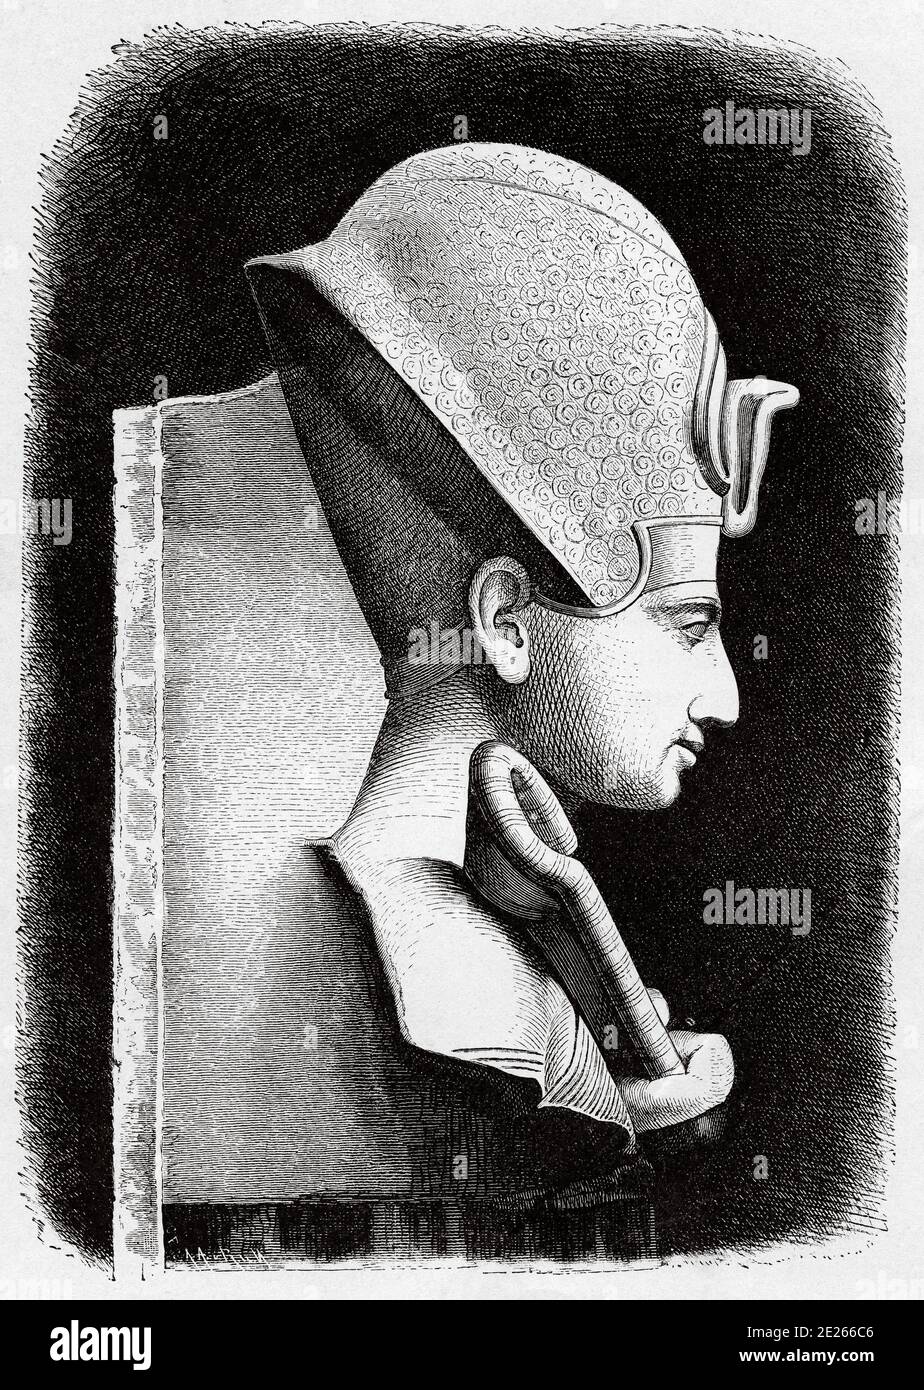 Portrait of Pharaoh Ramses II, he is considered the greatest, famous and most powerful pharaoh of the Egyptian Empire and oppressor of the Jews, ancient Egyptian empire. Egypt. Old engraving illustration from the book Universal history by Oscar Jager 1890 Stock Photo